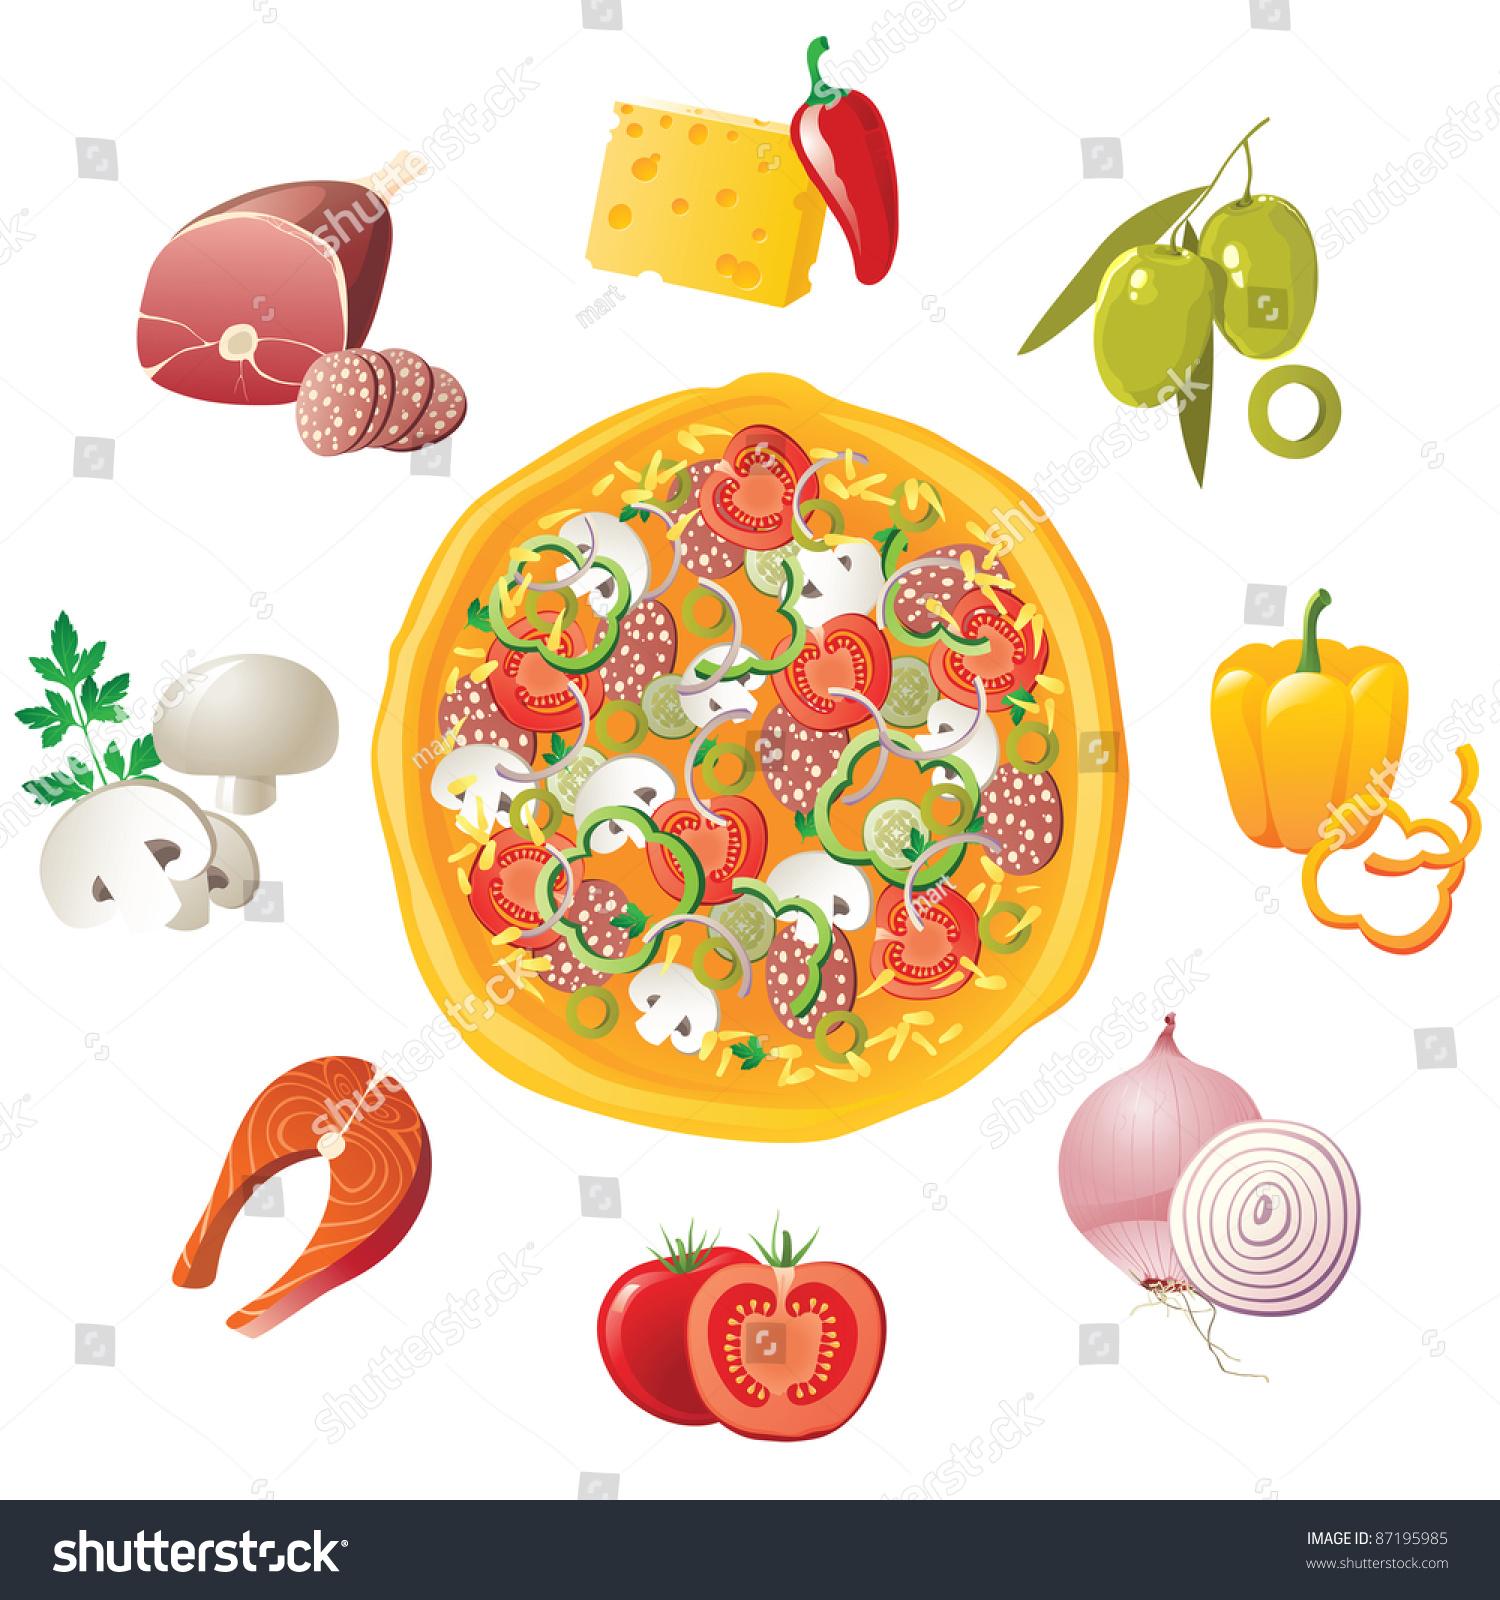 pizza ingredients clipart - photo #26